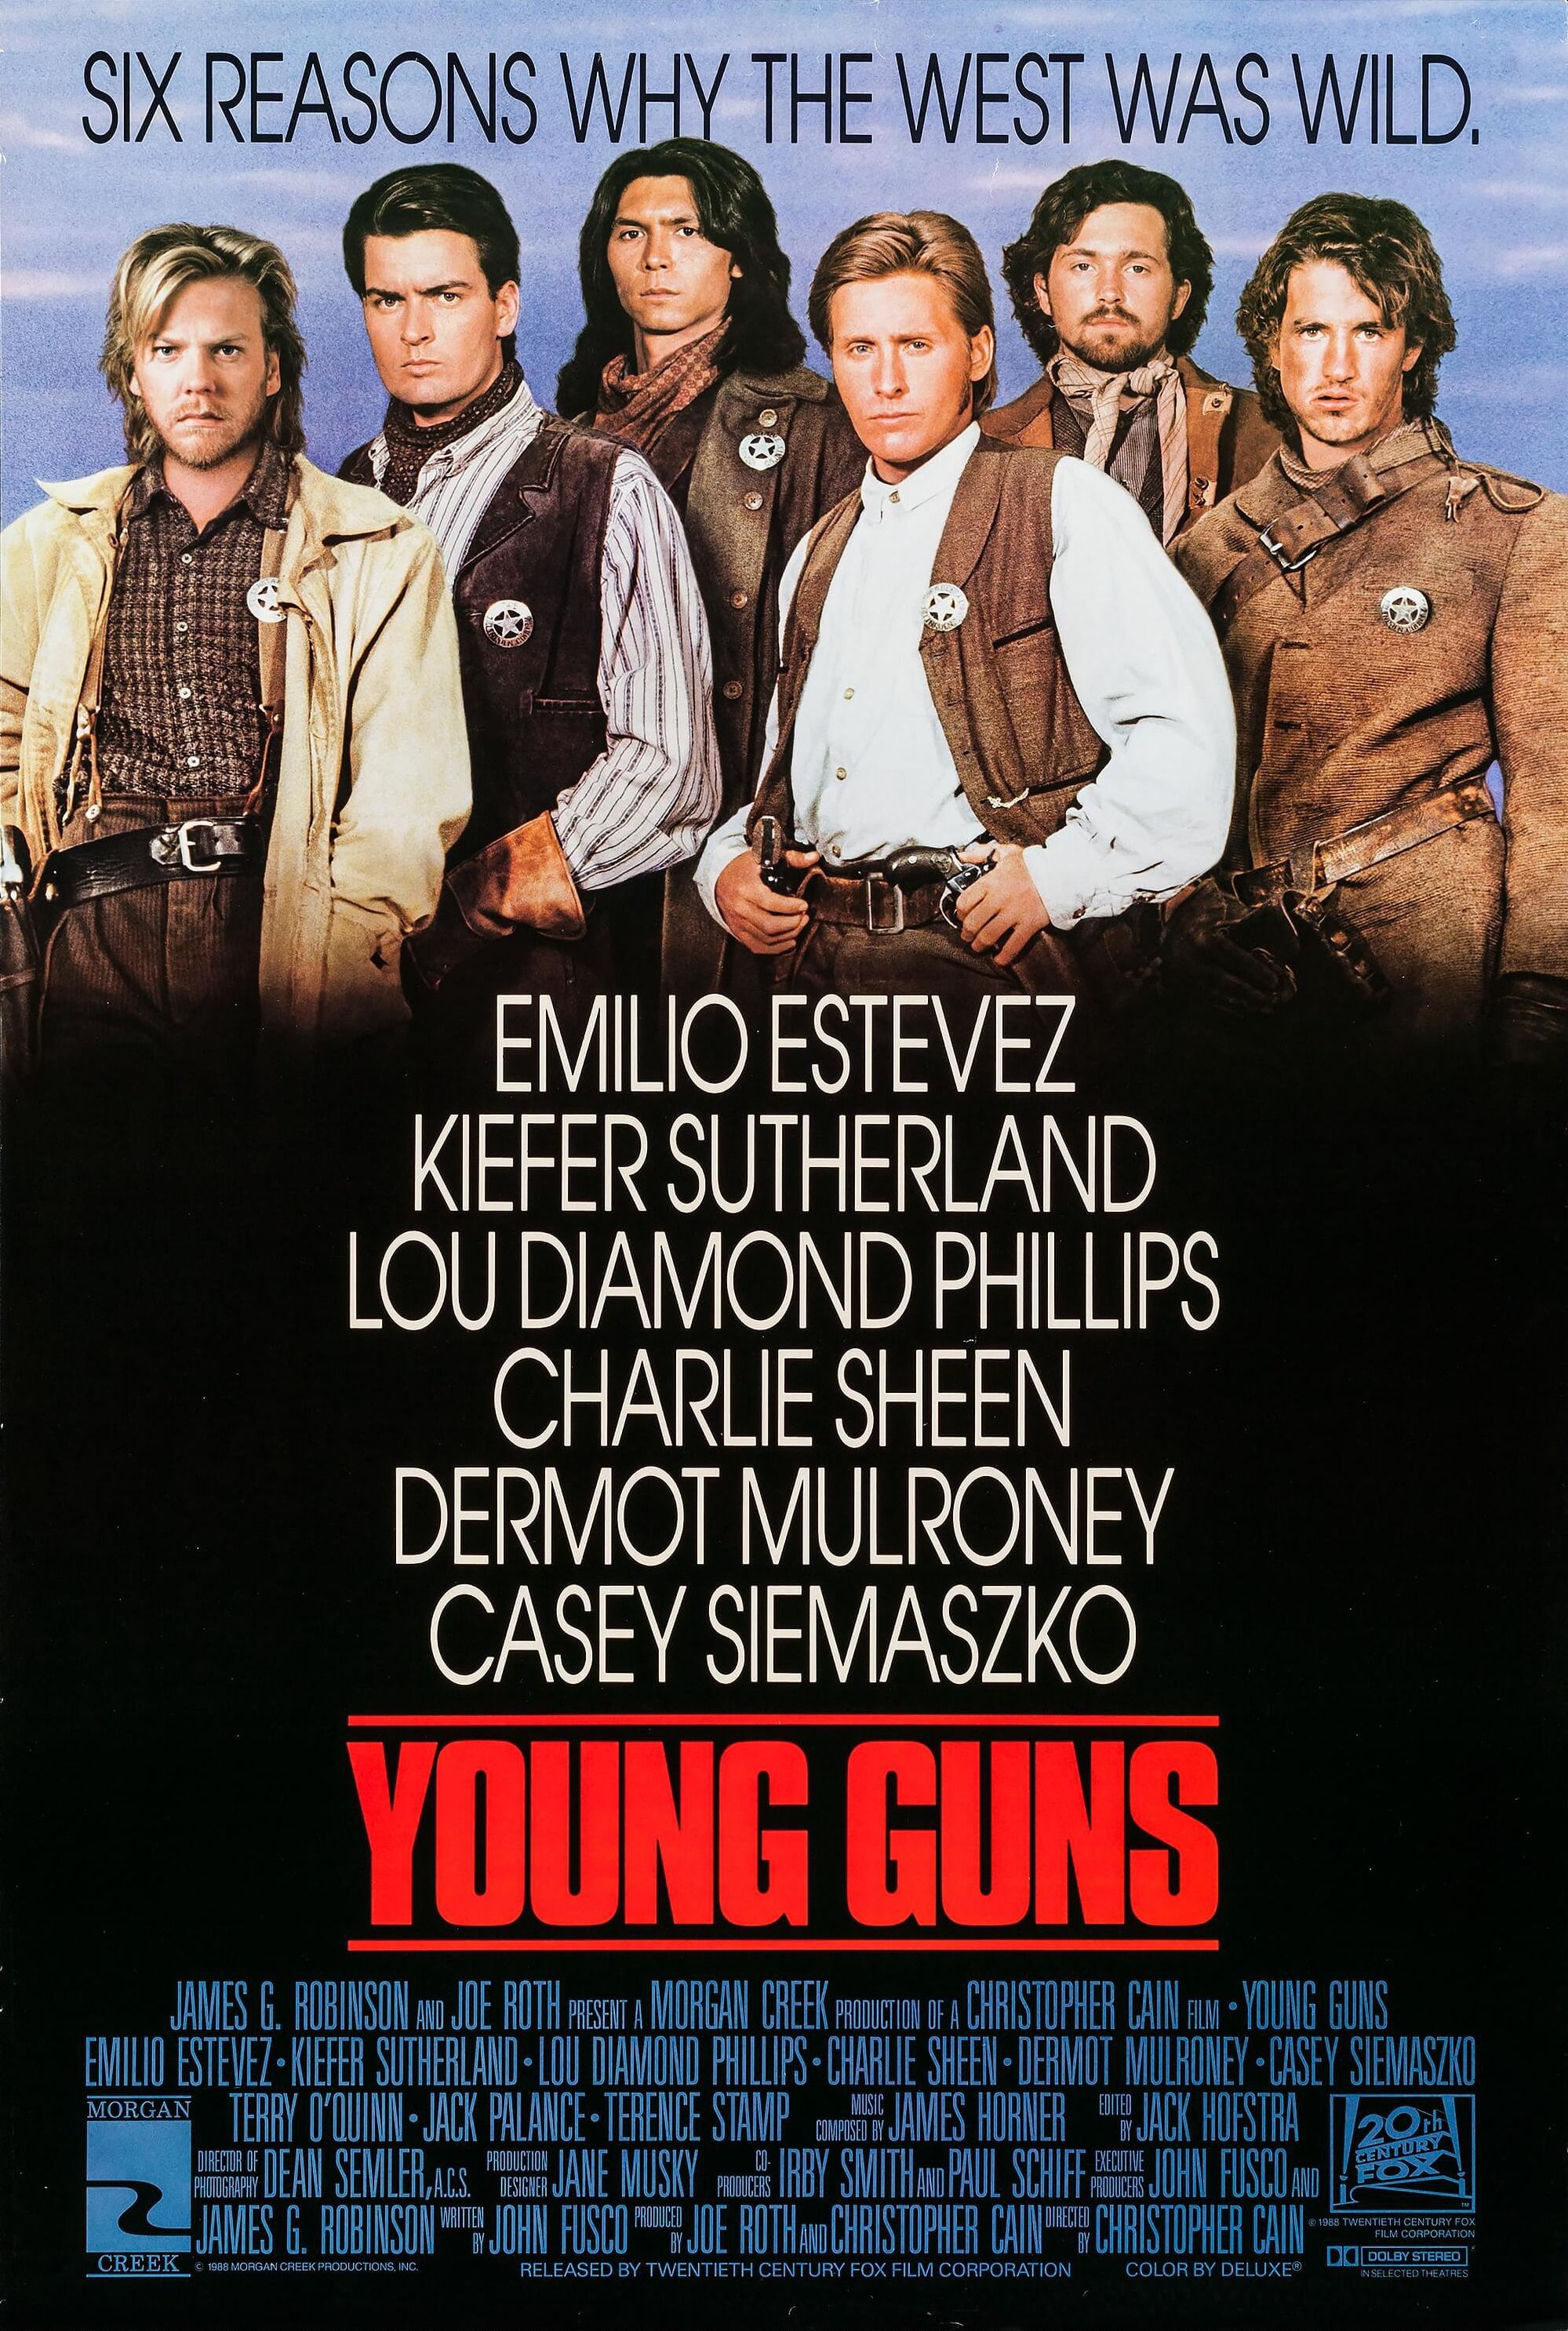 did tom cruise have a cameo in young guns